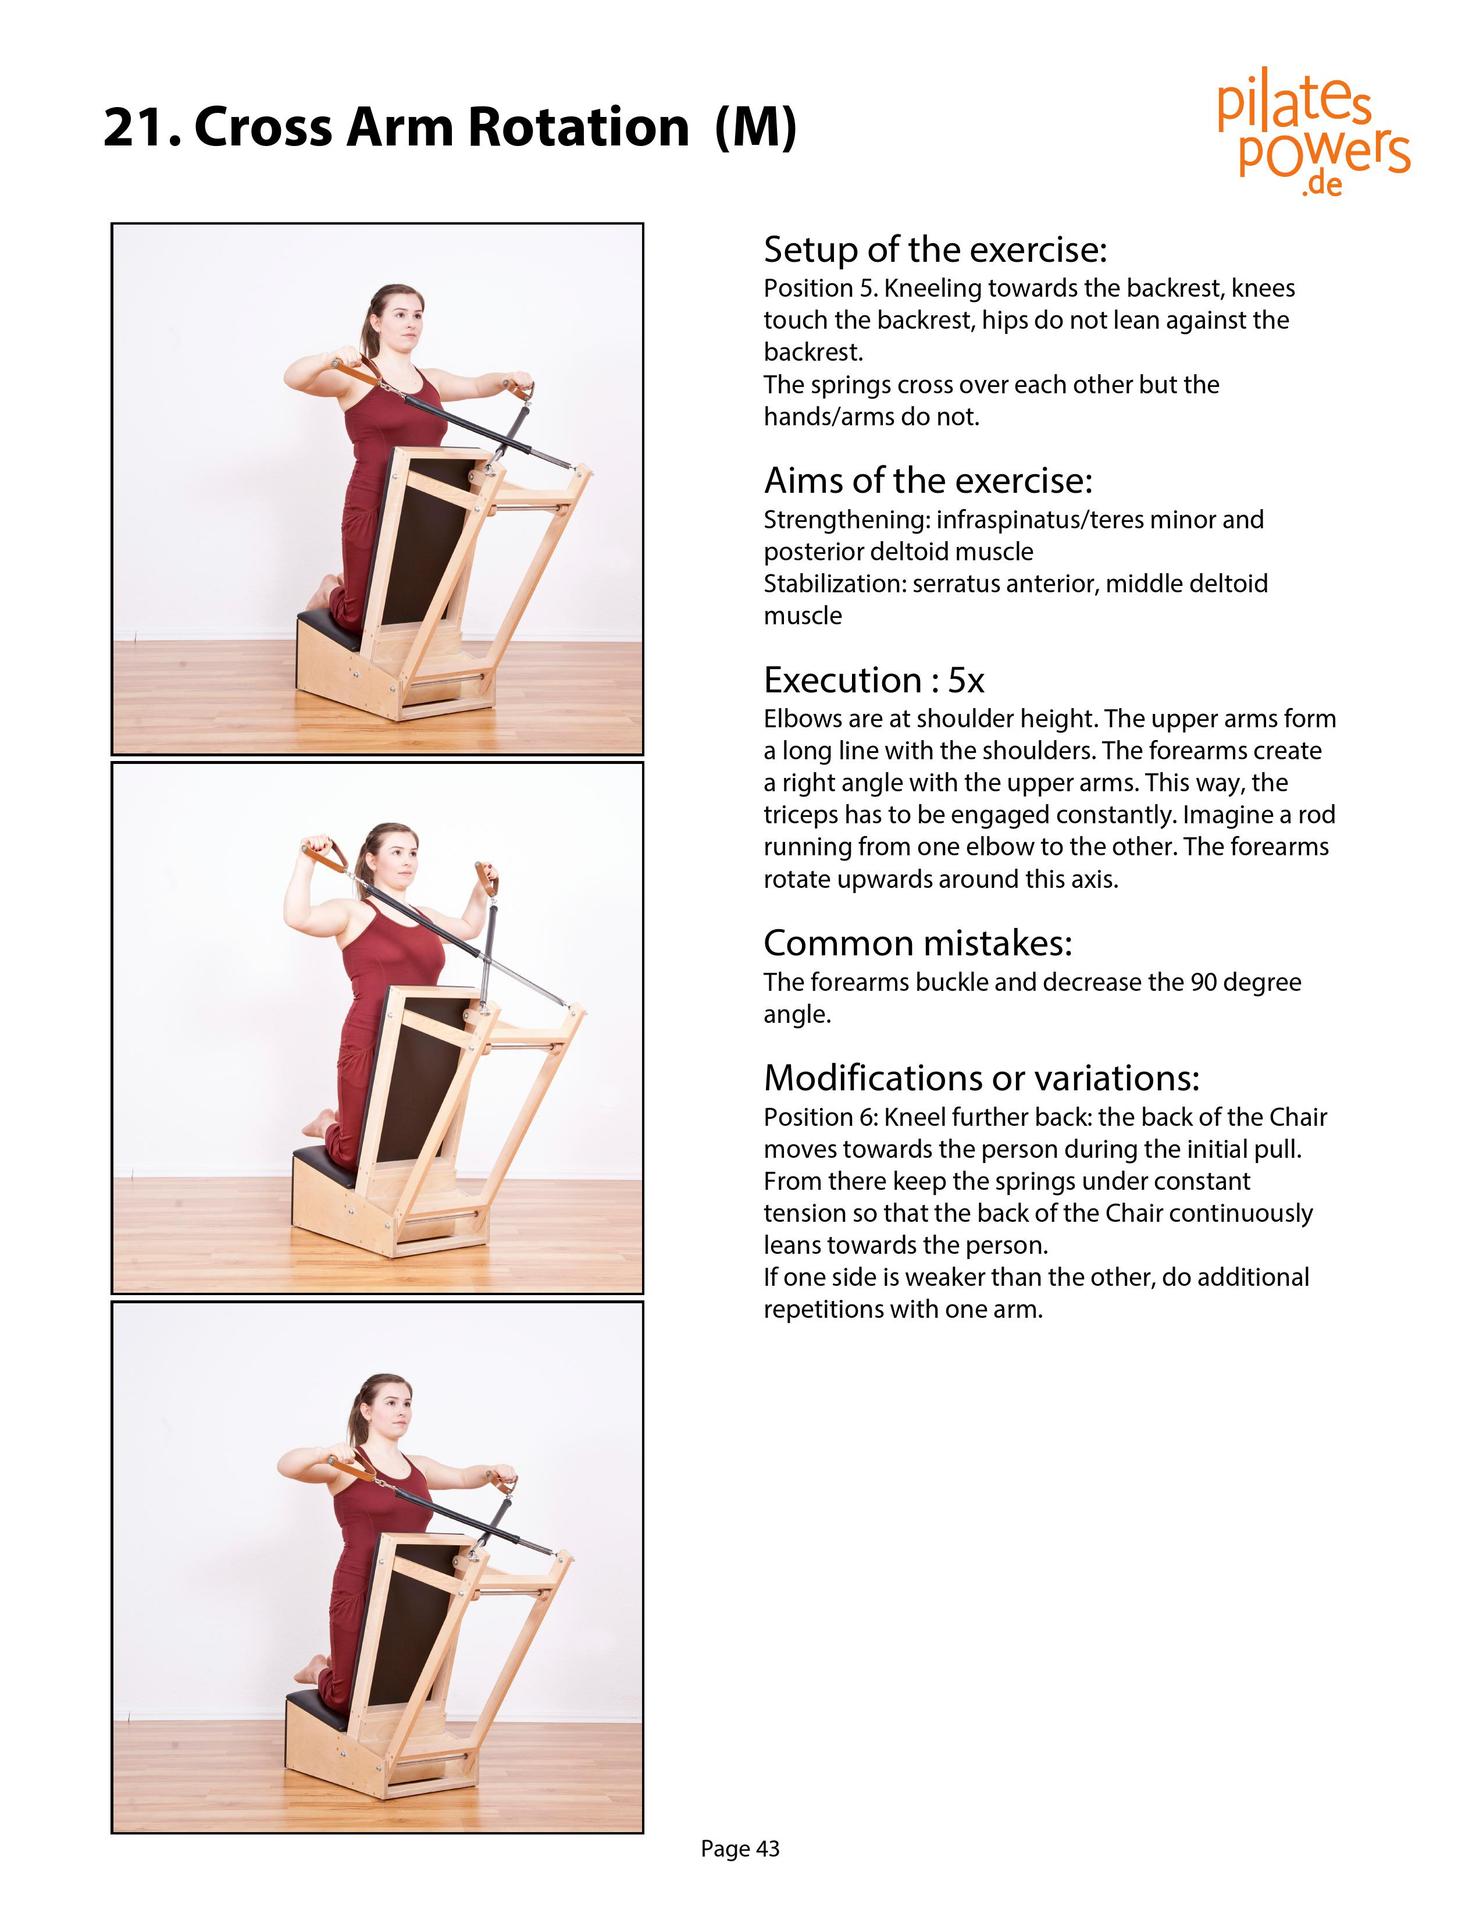 The Pilates Arm Chair The 42 most effective exercises - photo 43